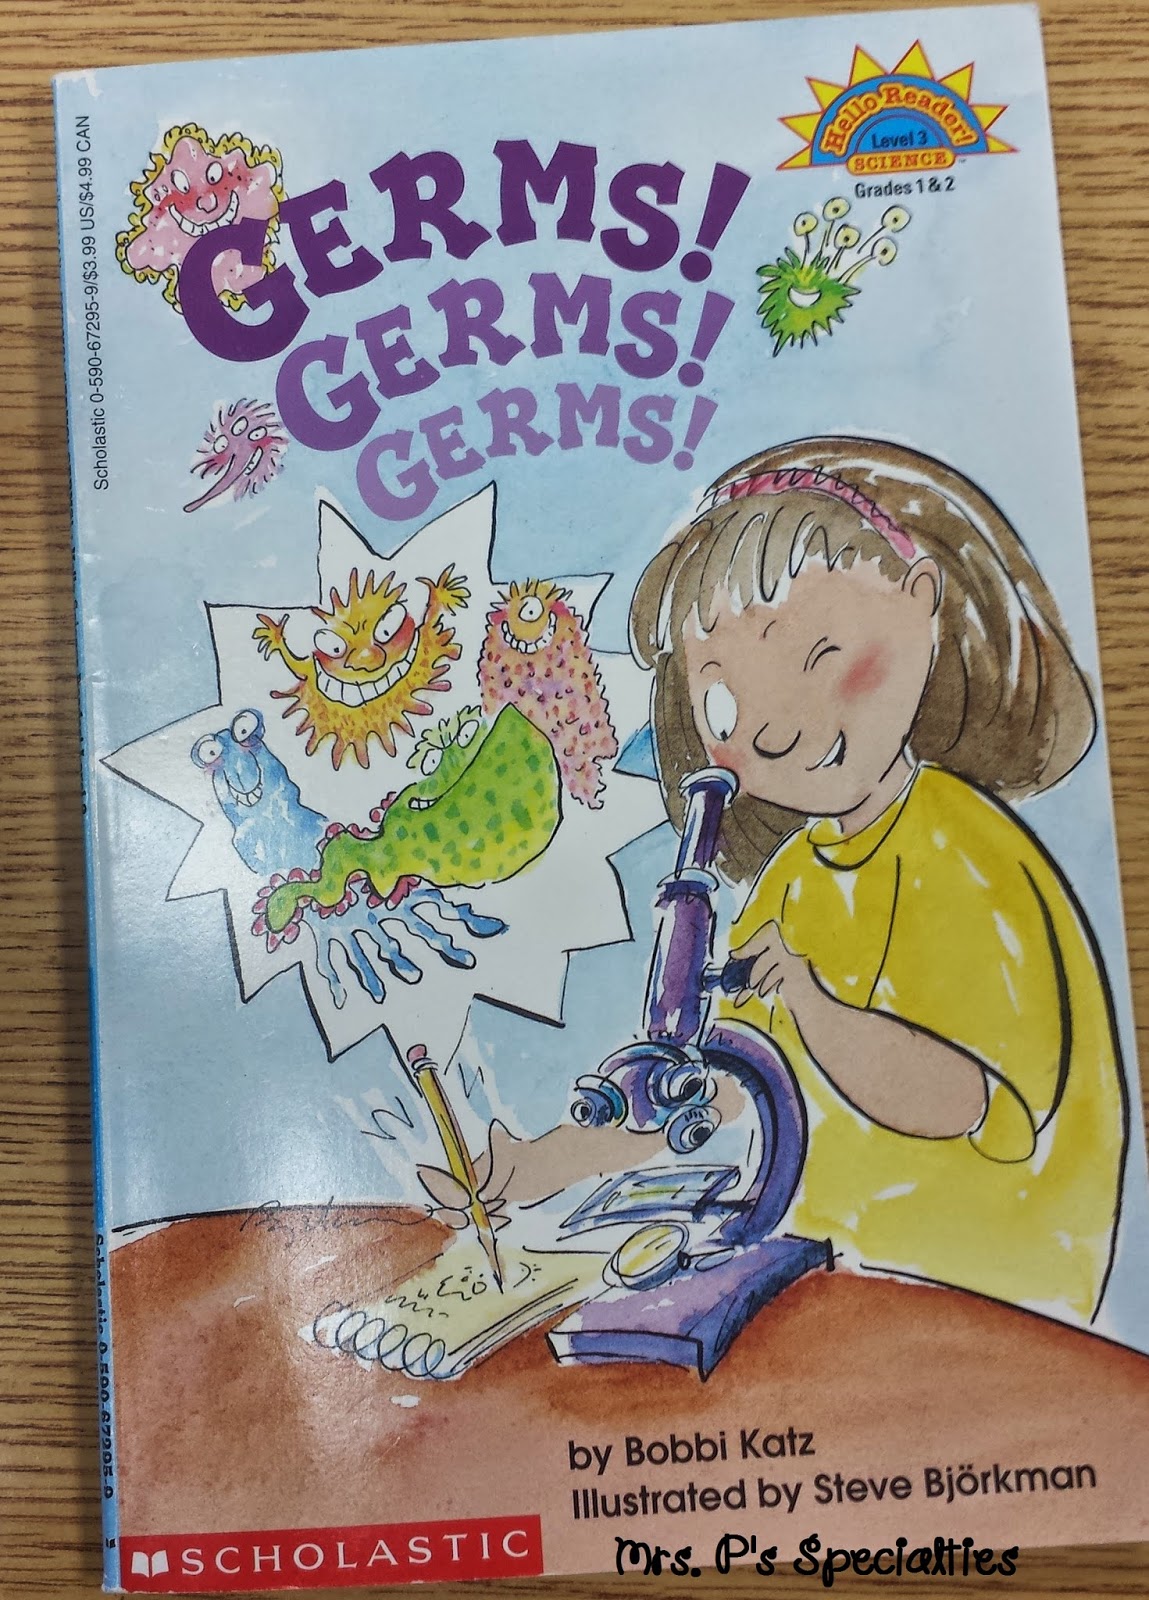 photo of the book we read, Germs! Germs! Germs!